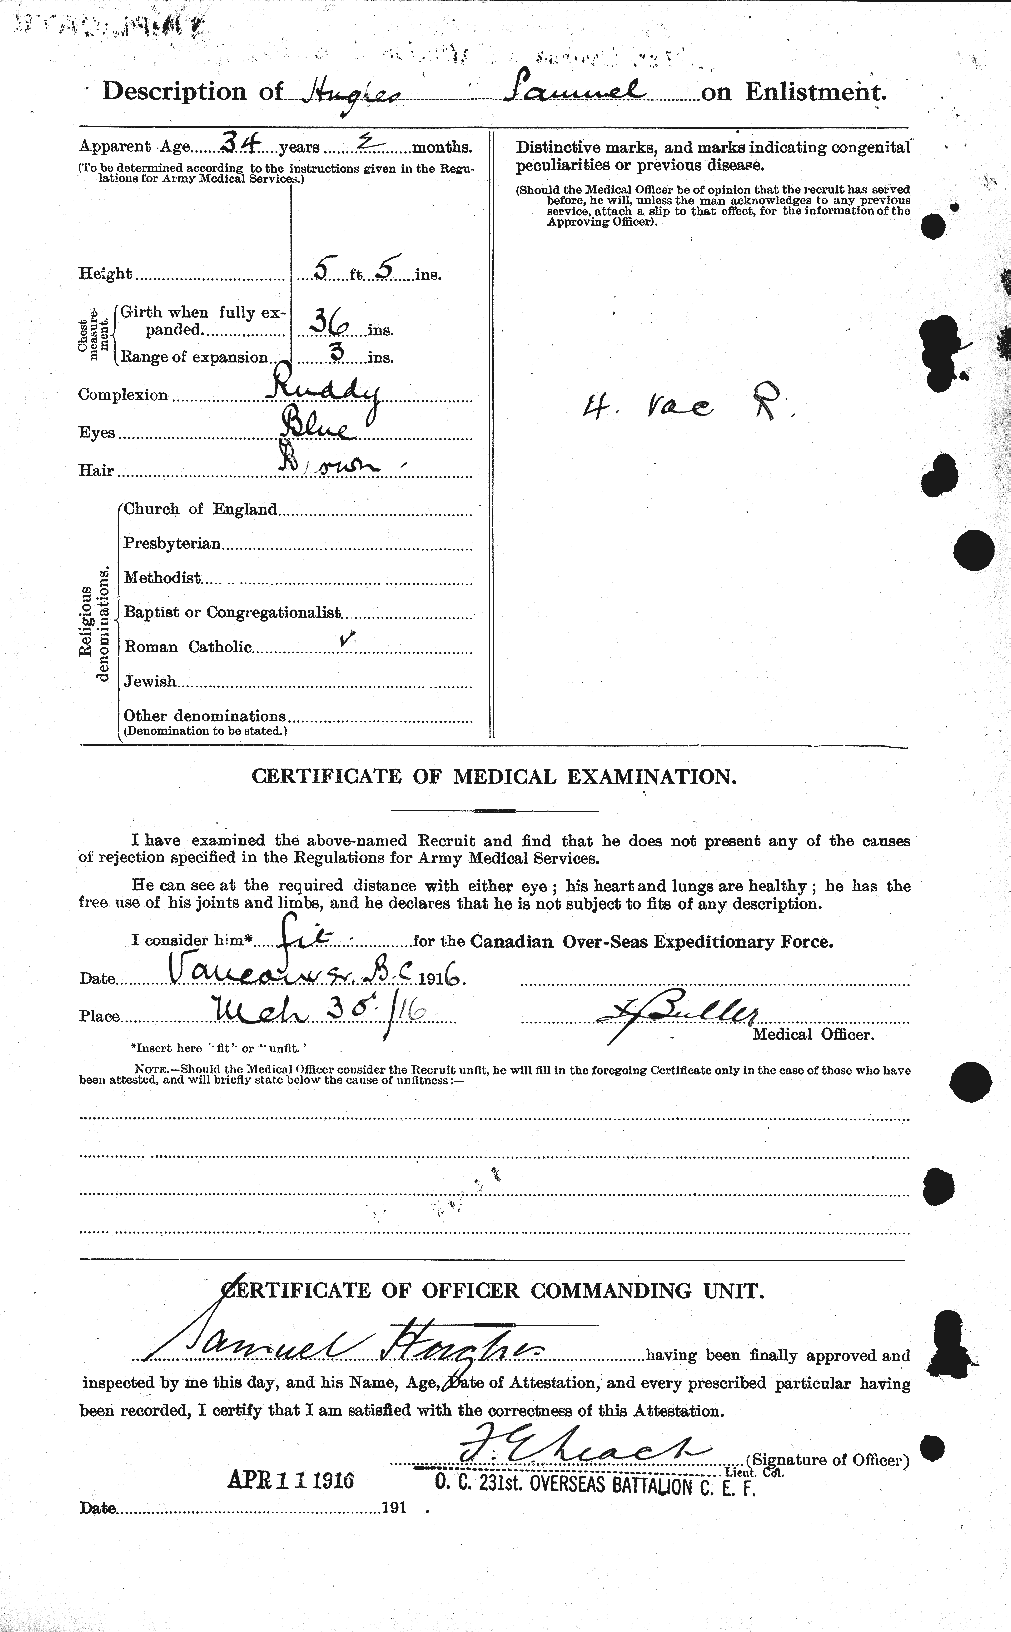 Personnel Records of the First World War - CEF 406633b